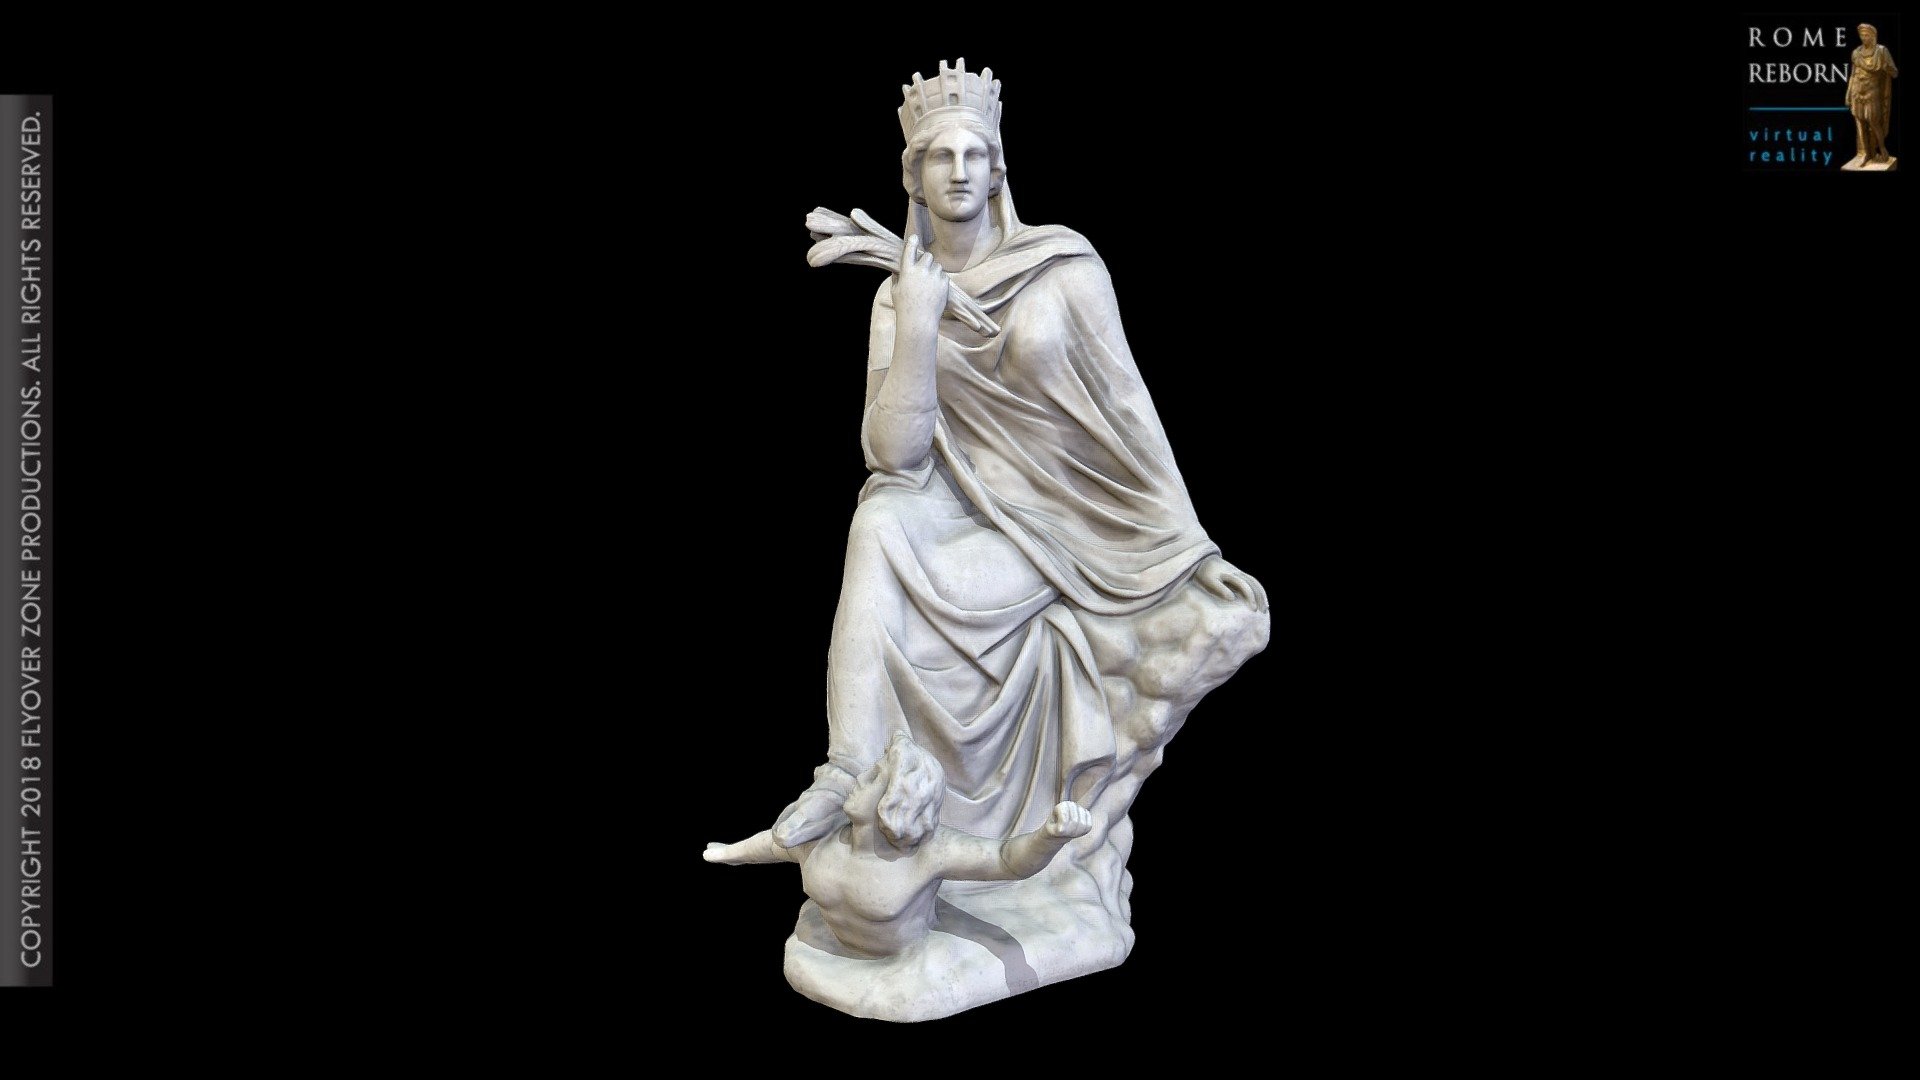 Name: Tyche of Antiocheia
Material: Cast (plaster of Paris)
Format: Statue
Museum: By permission of the Museo dell’Arte Classica, Sapienza University, Rome
Museum inventory number: 816
Museum of original: Vatican Museum (Gallery of the Candelabra), Rome
Photographer/Modeler: Carter Conaway
Copyright 2019 Flyover Zone Productions. All rights reserved.
 - Tyche of Antiocheia - 3D model by Flyover Zone (@FlyoverZone) 3d model